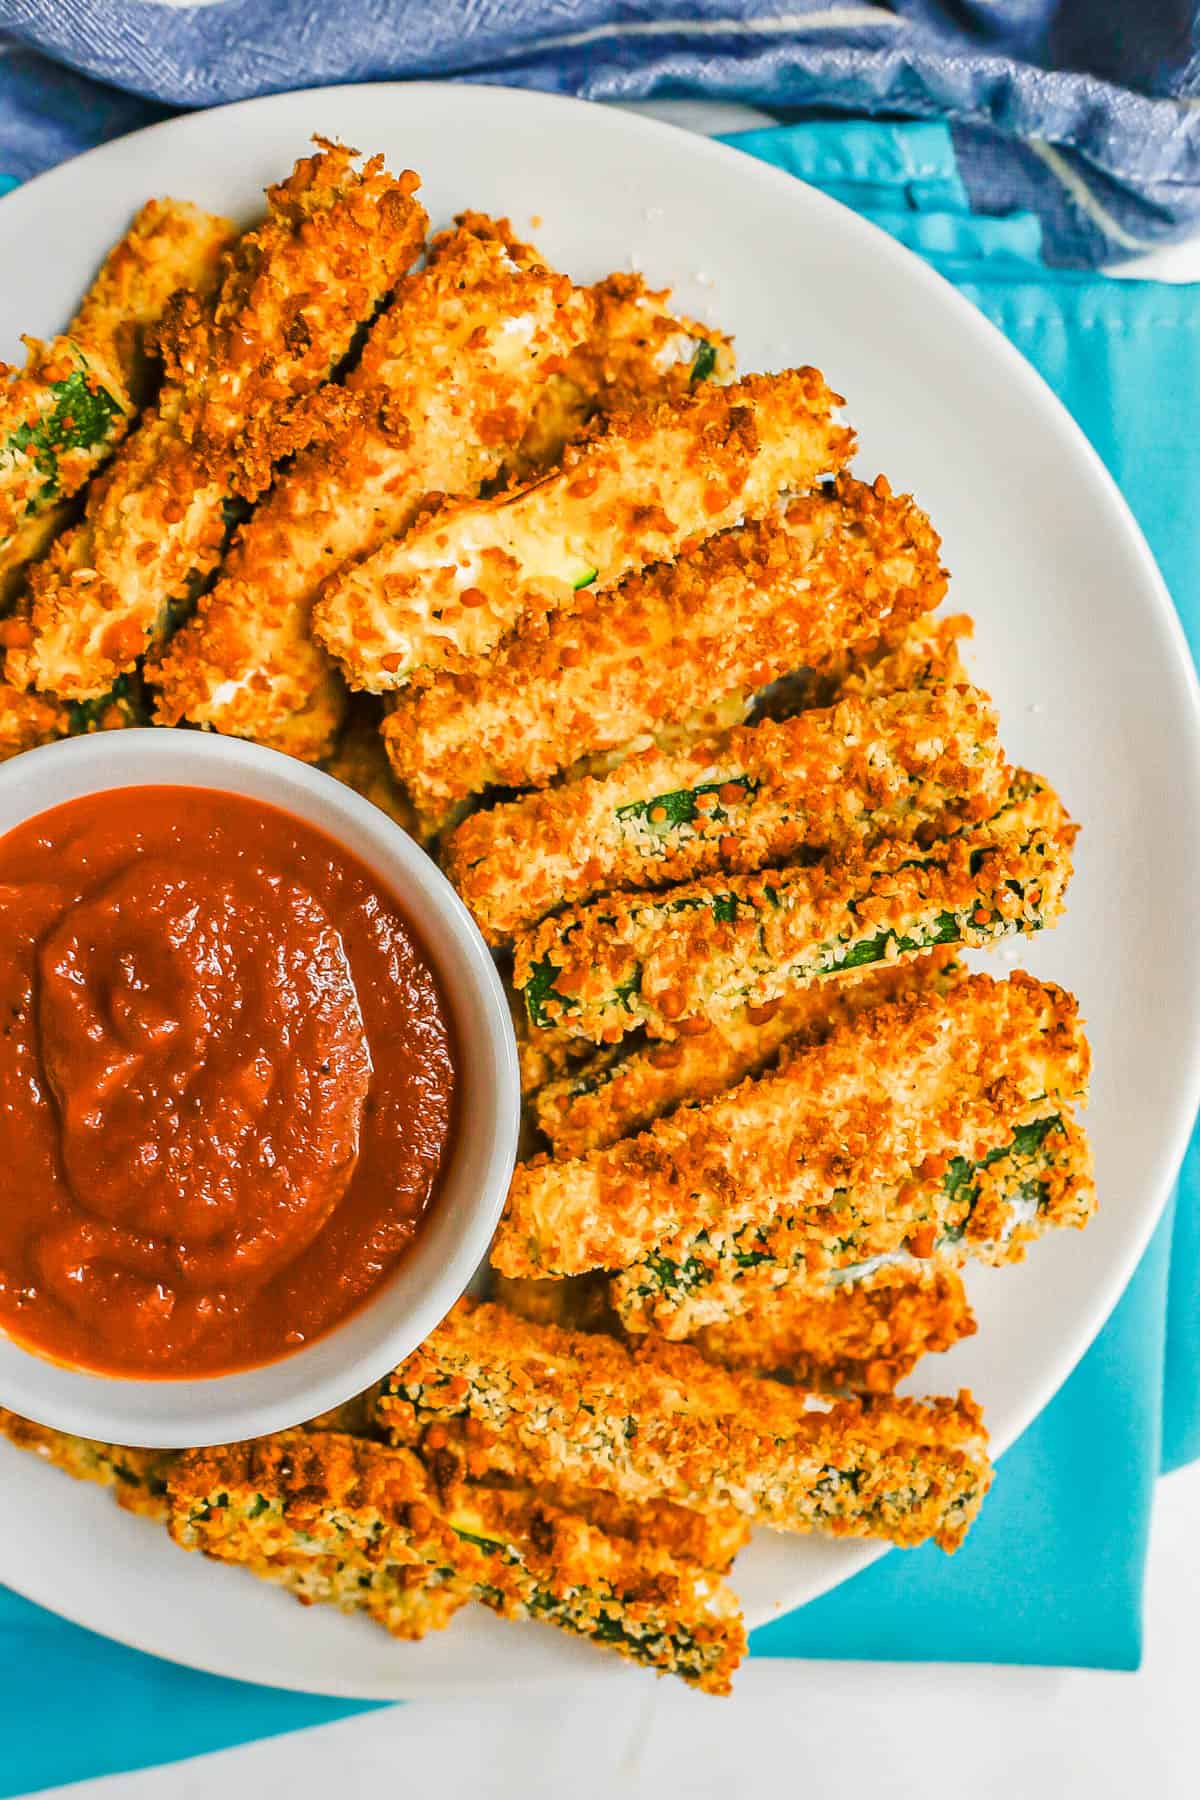 A plate of zucchini fries on a round white plate with a small bowl of marinara.